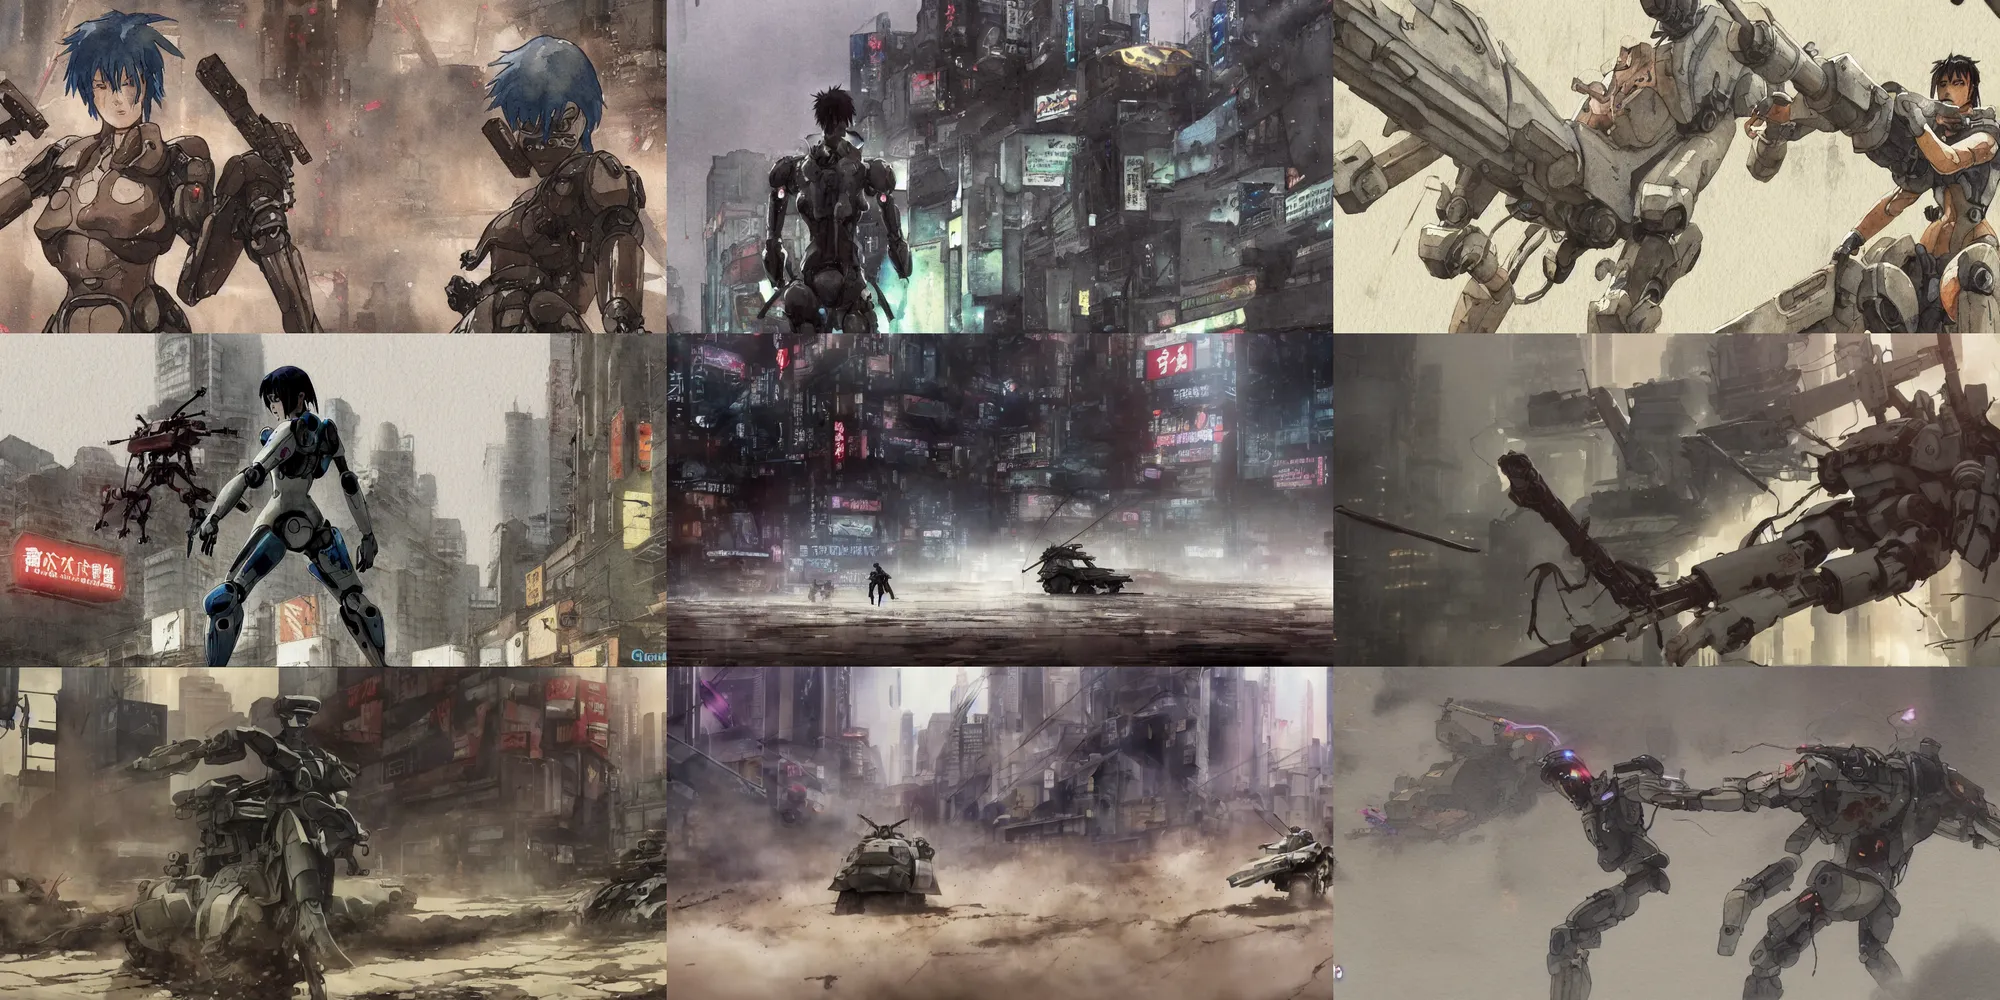 Prompt: incredible screenshot, simple watercolor, masamune shirow ghost in the shell movie scene close up broken Kusanagi tank battle, brown mud, dust, tank with legs, robot arm, ripped to shreds, angry expression, chase ,light rain, LED billboard advertisements on buildings, hd, 4k, remaster, dynamic camera angle, deep 3 point perspective, fish eye, dynamic scene